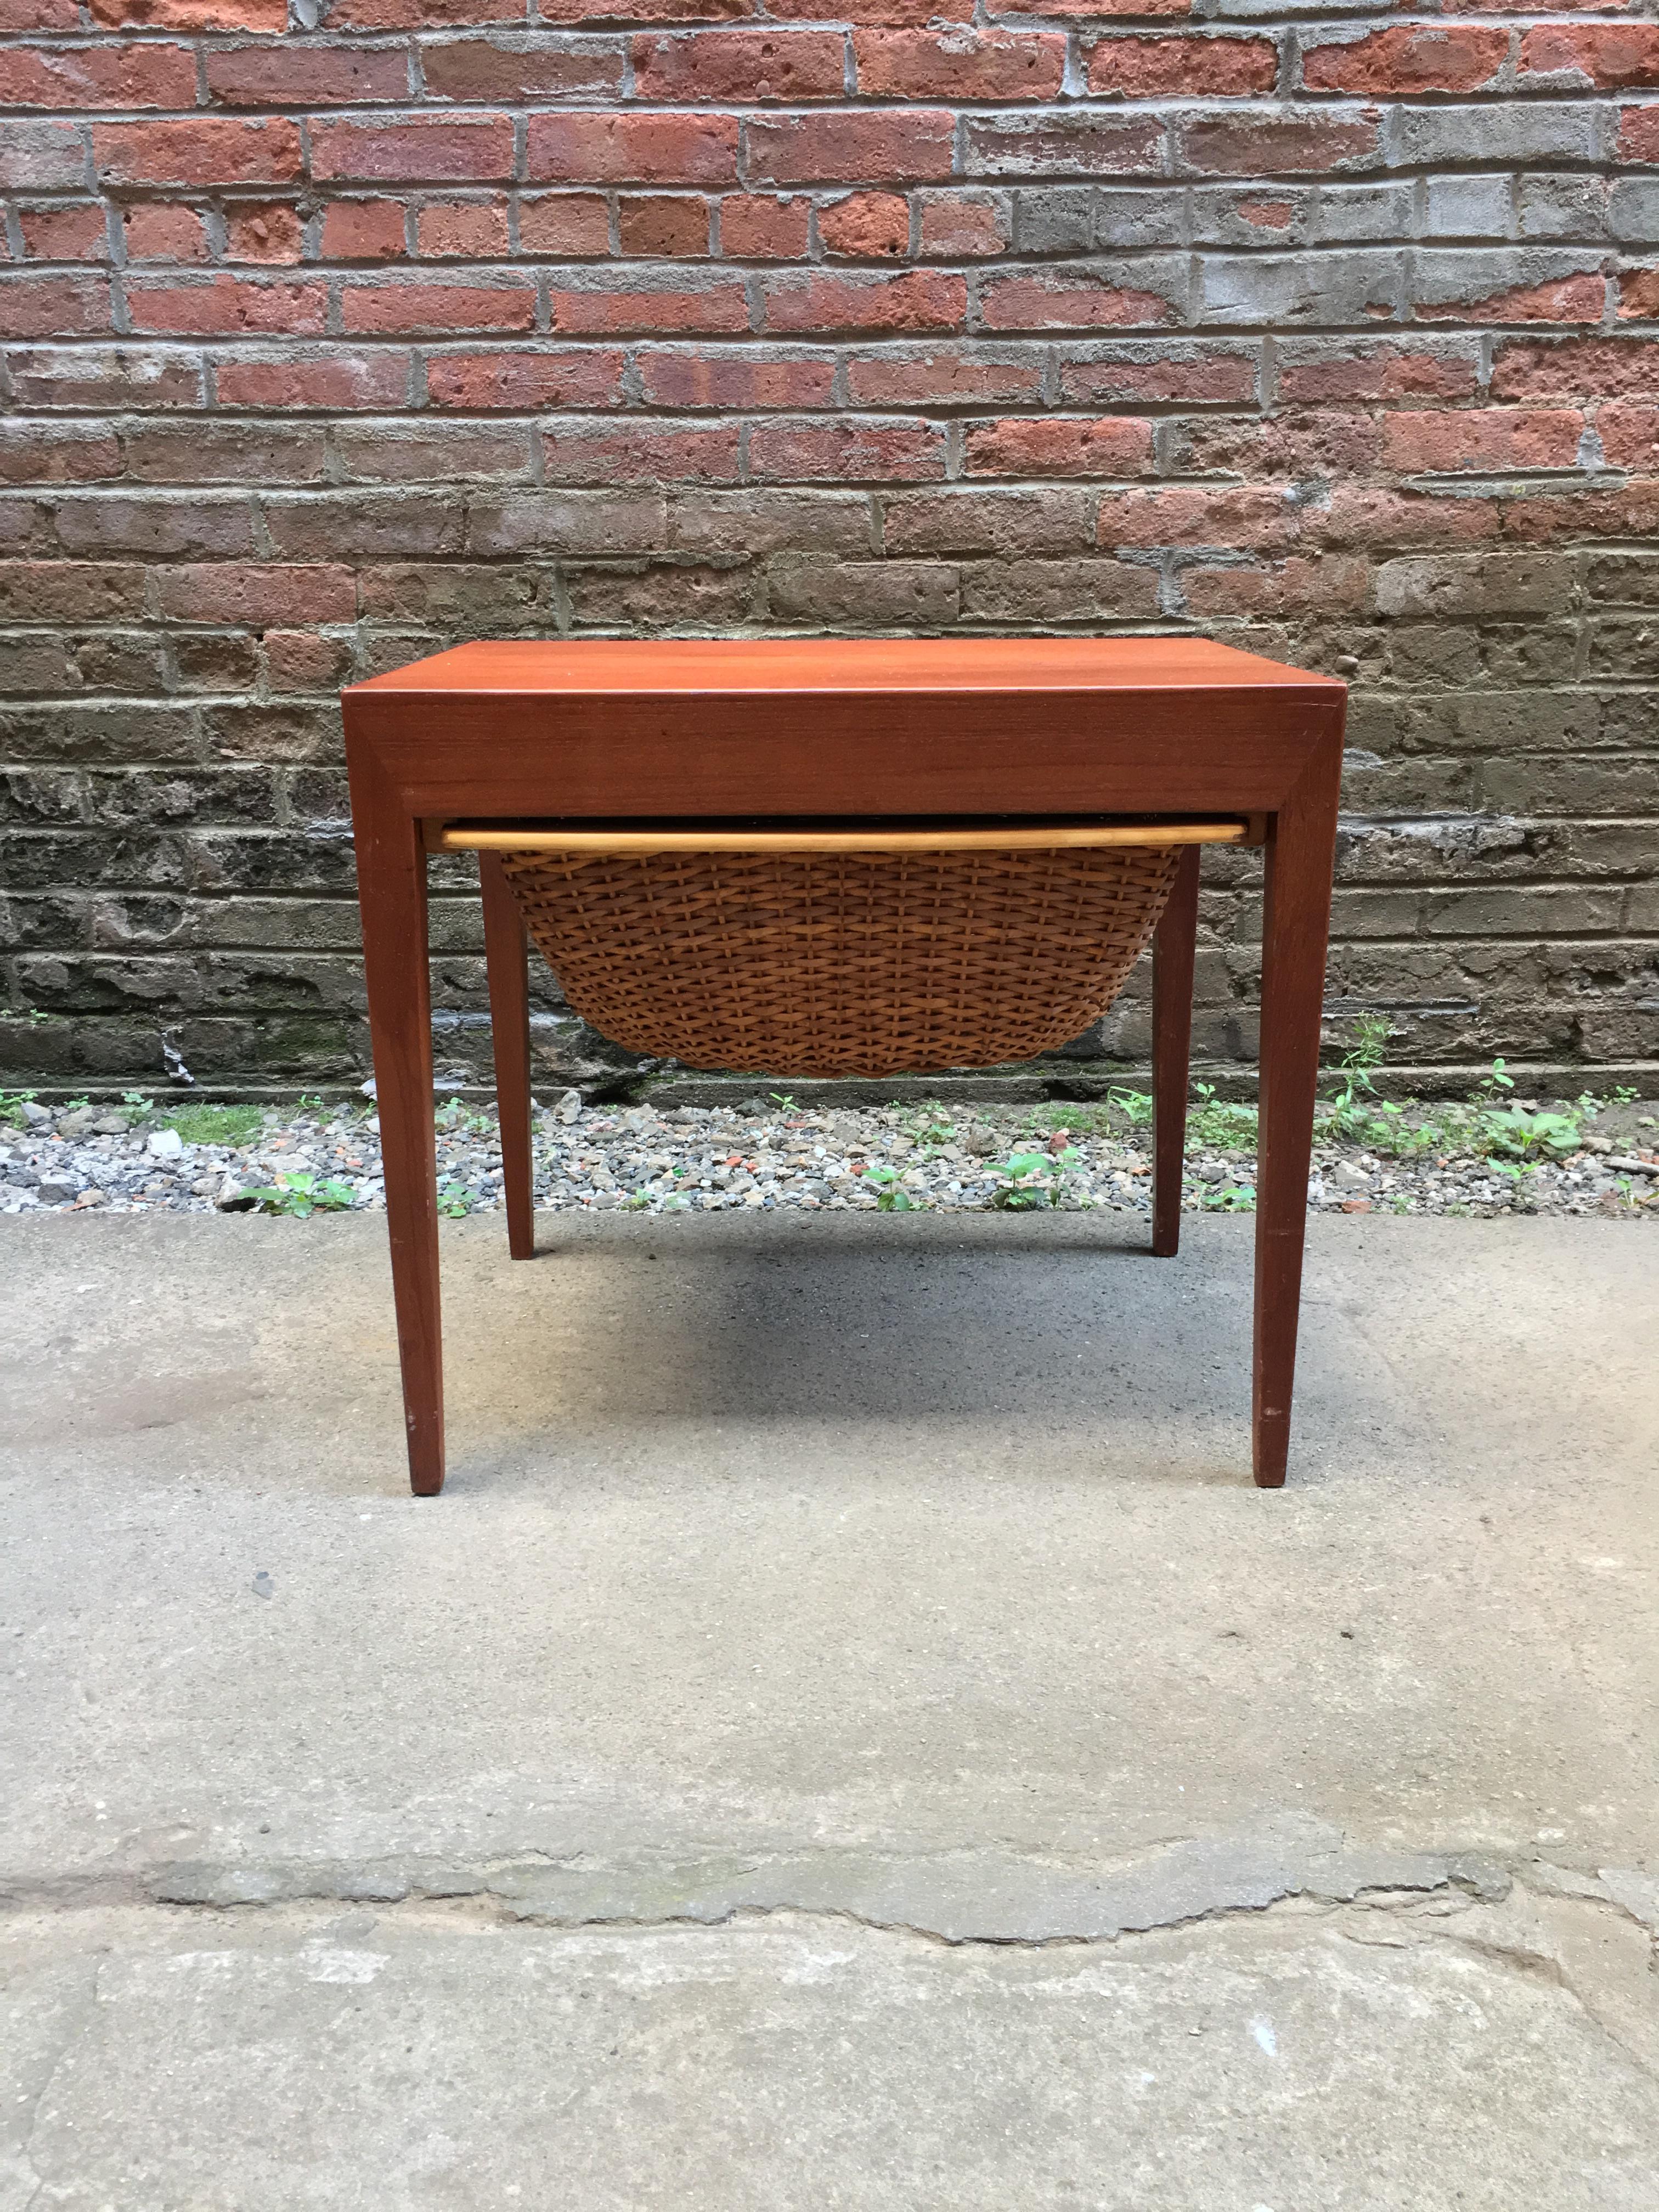 Teak and rattan sewing table designed by Severin Hansen Jr. for Haslev Mobelsnedkeri, circa 1960. Tapered legs, rattan basket and a small drawer originally for sewing implements complete with pin cushion! The rattan basket initially held yarn,